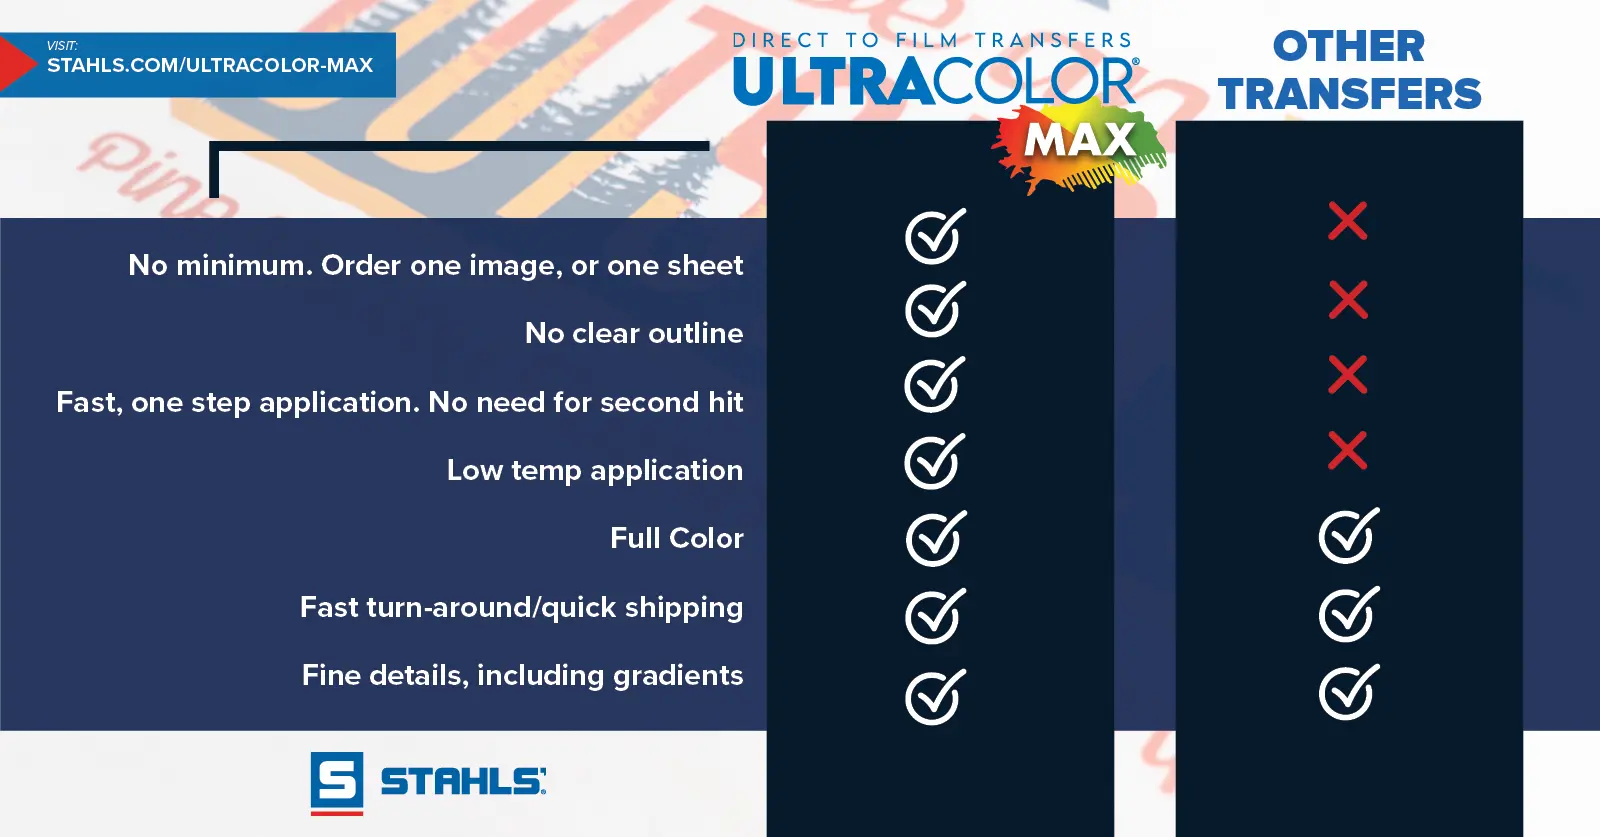 UltraColor MAX versus other transfers